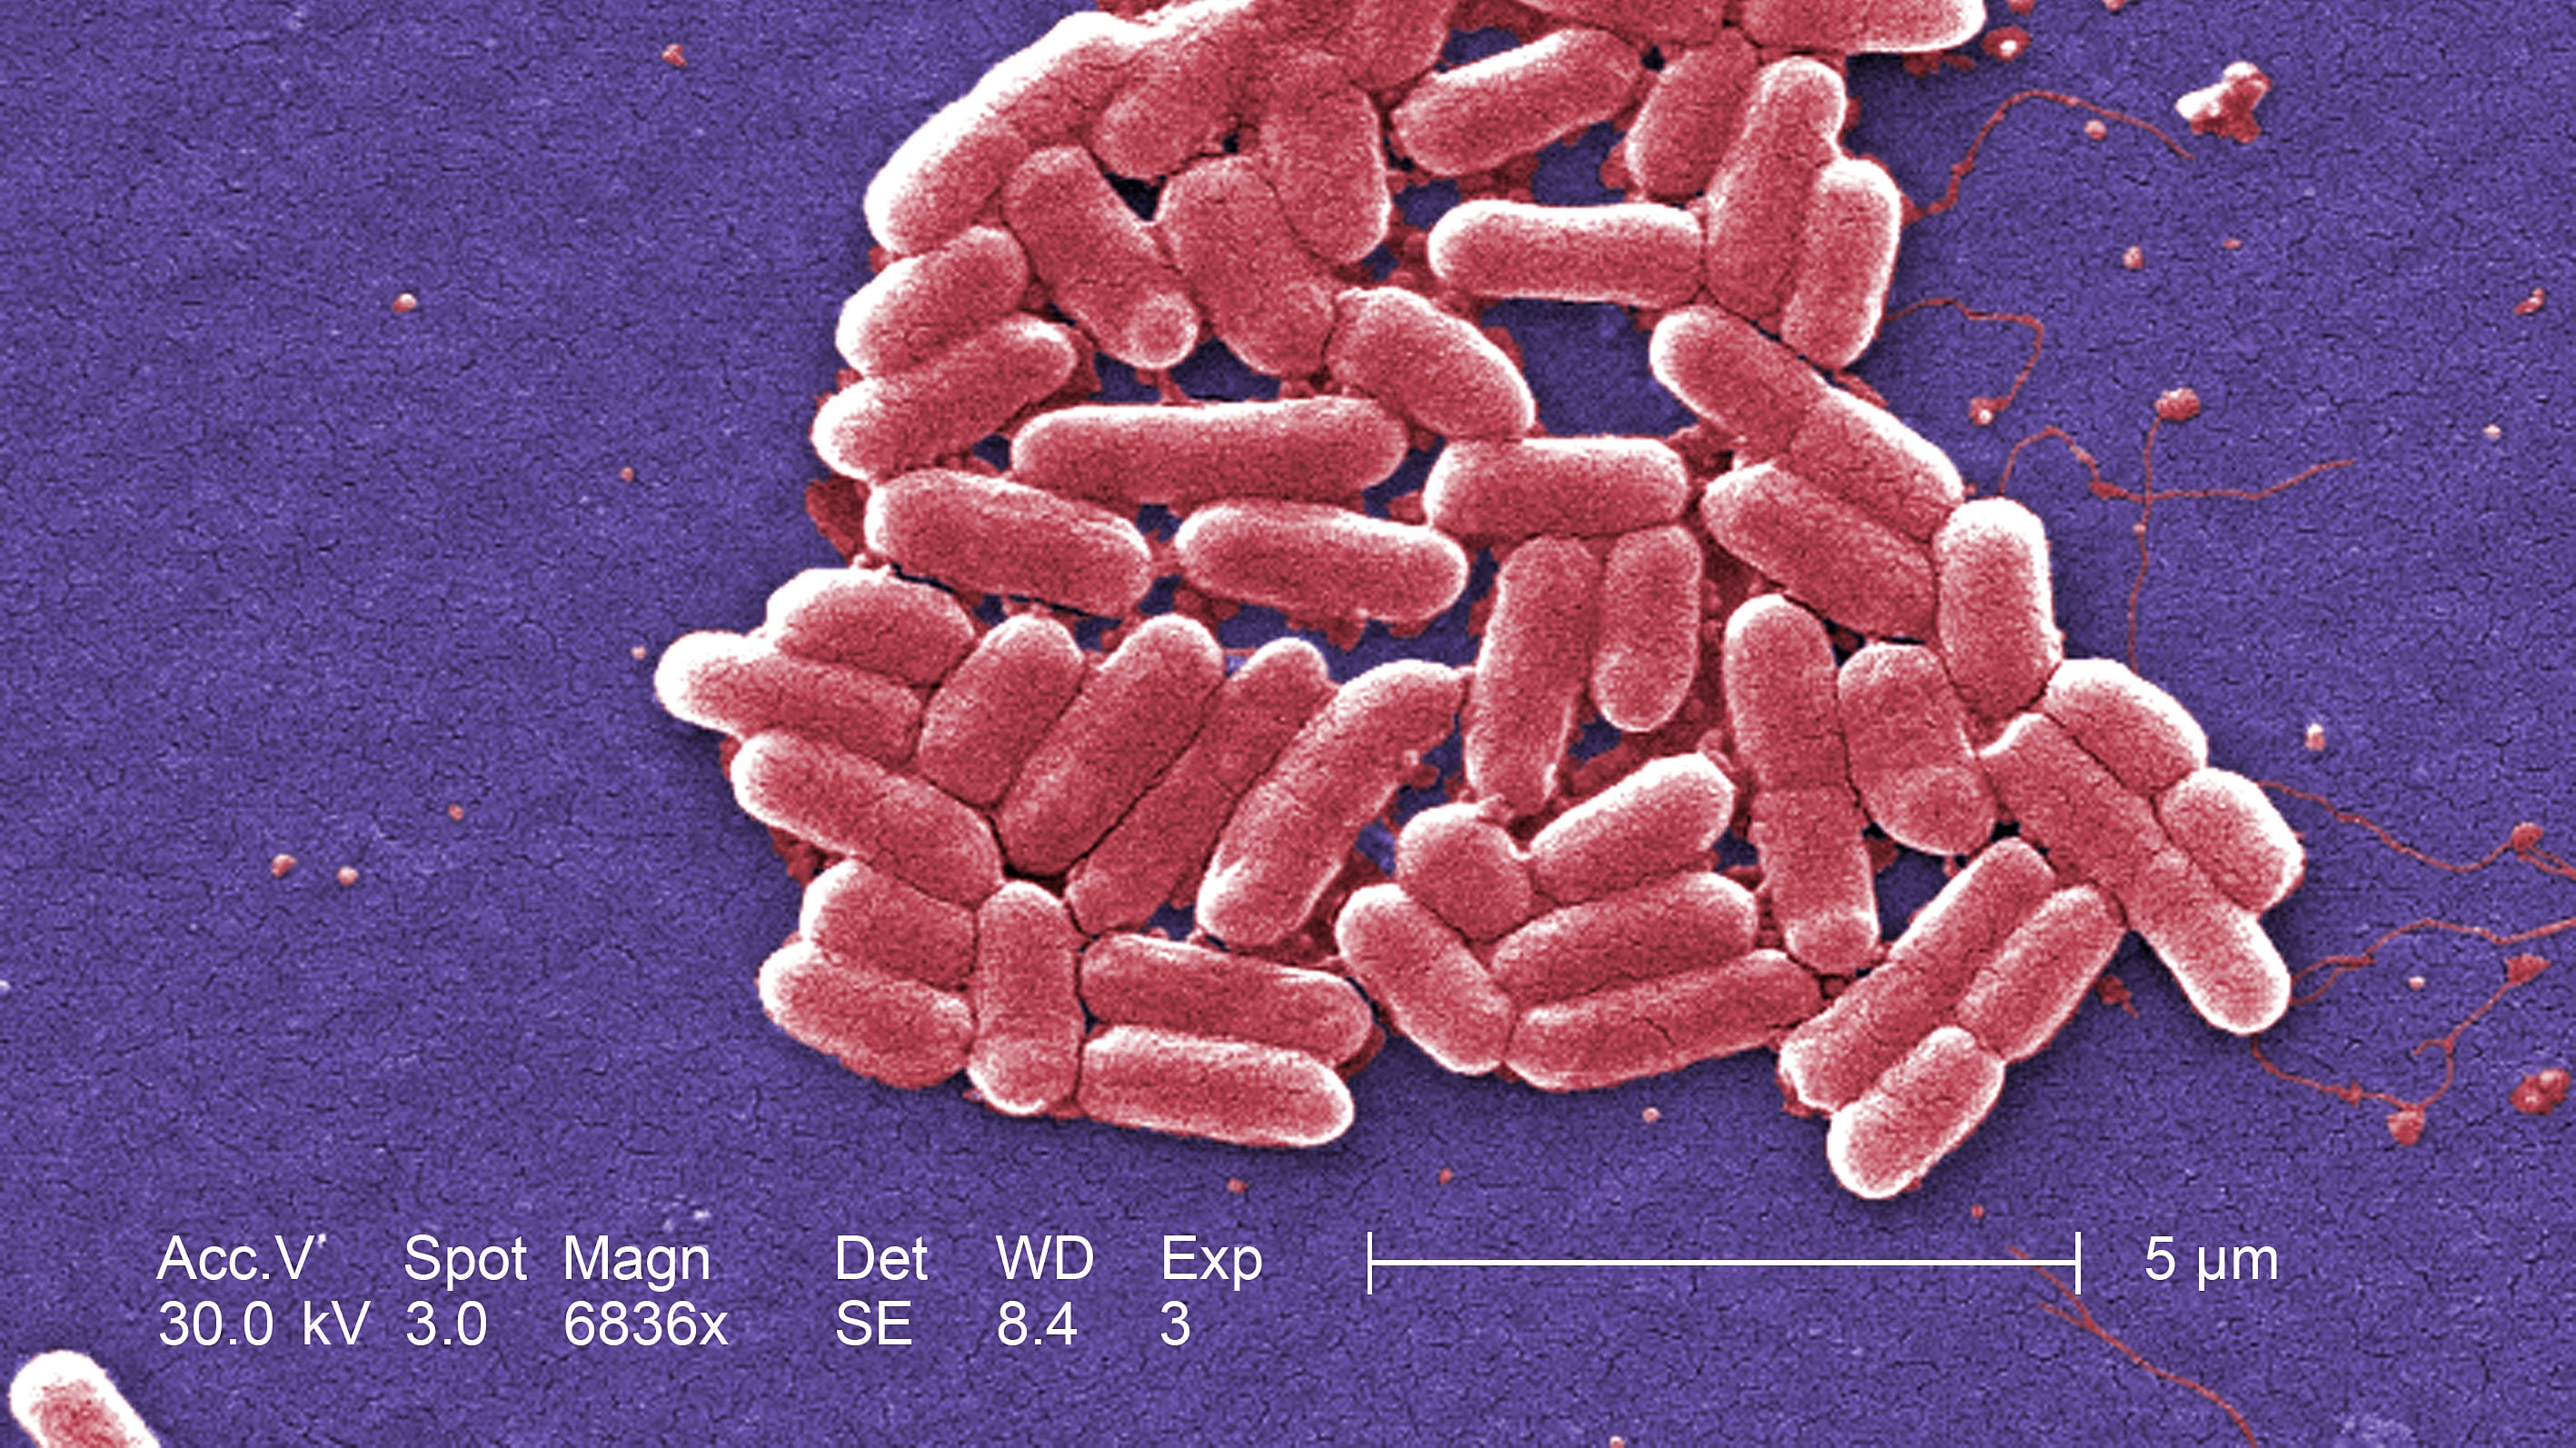 E.coli is a diverse group of bacteria that are normally harmless and live in the intestines of humans and animals